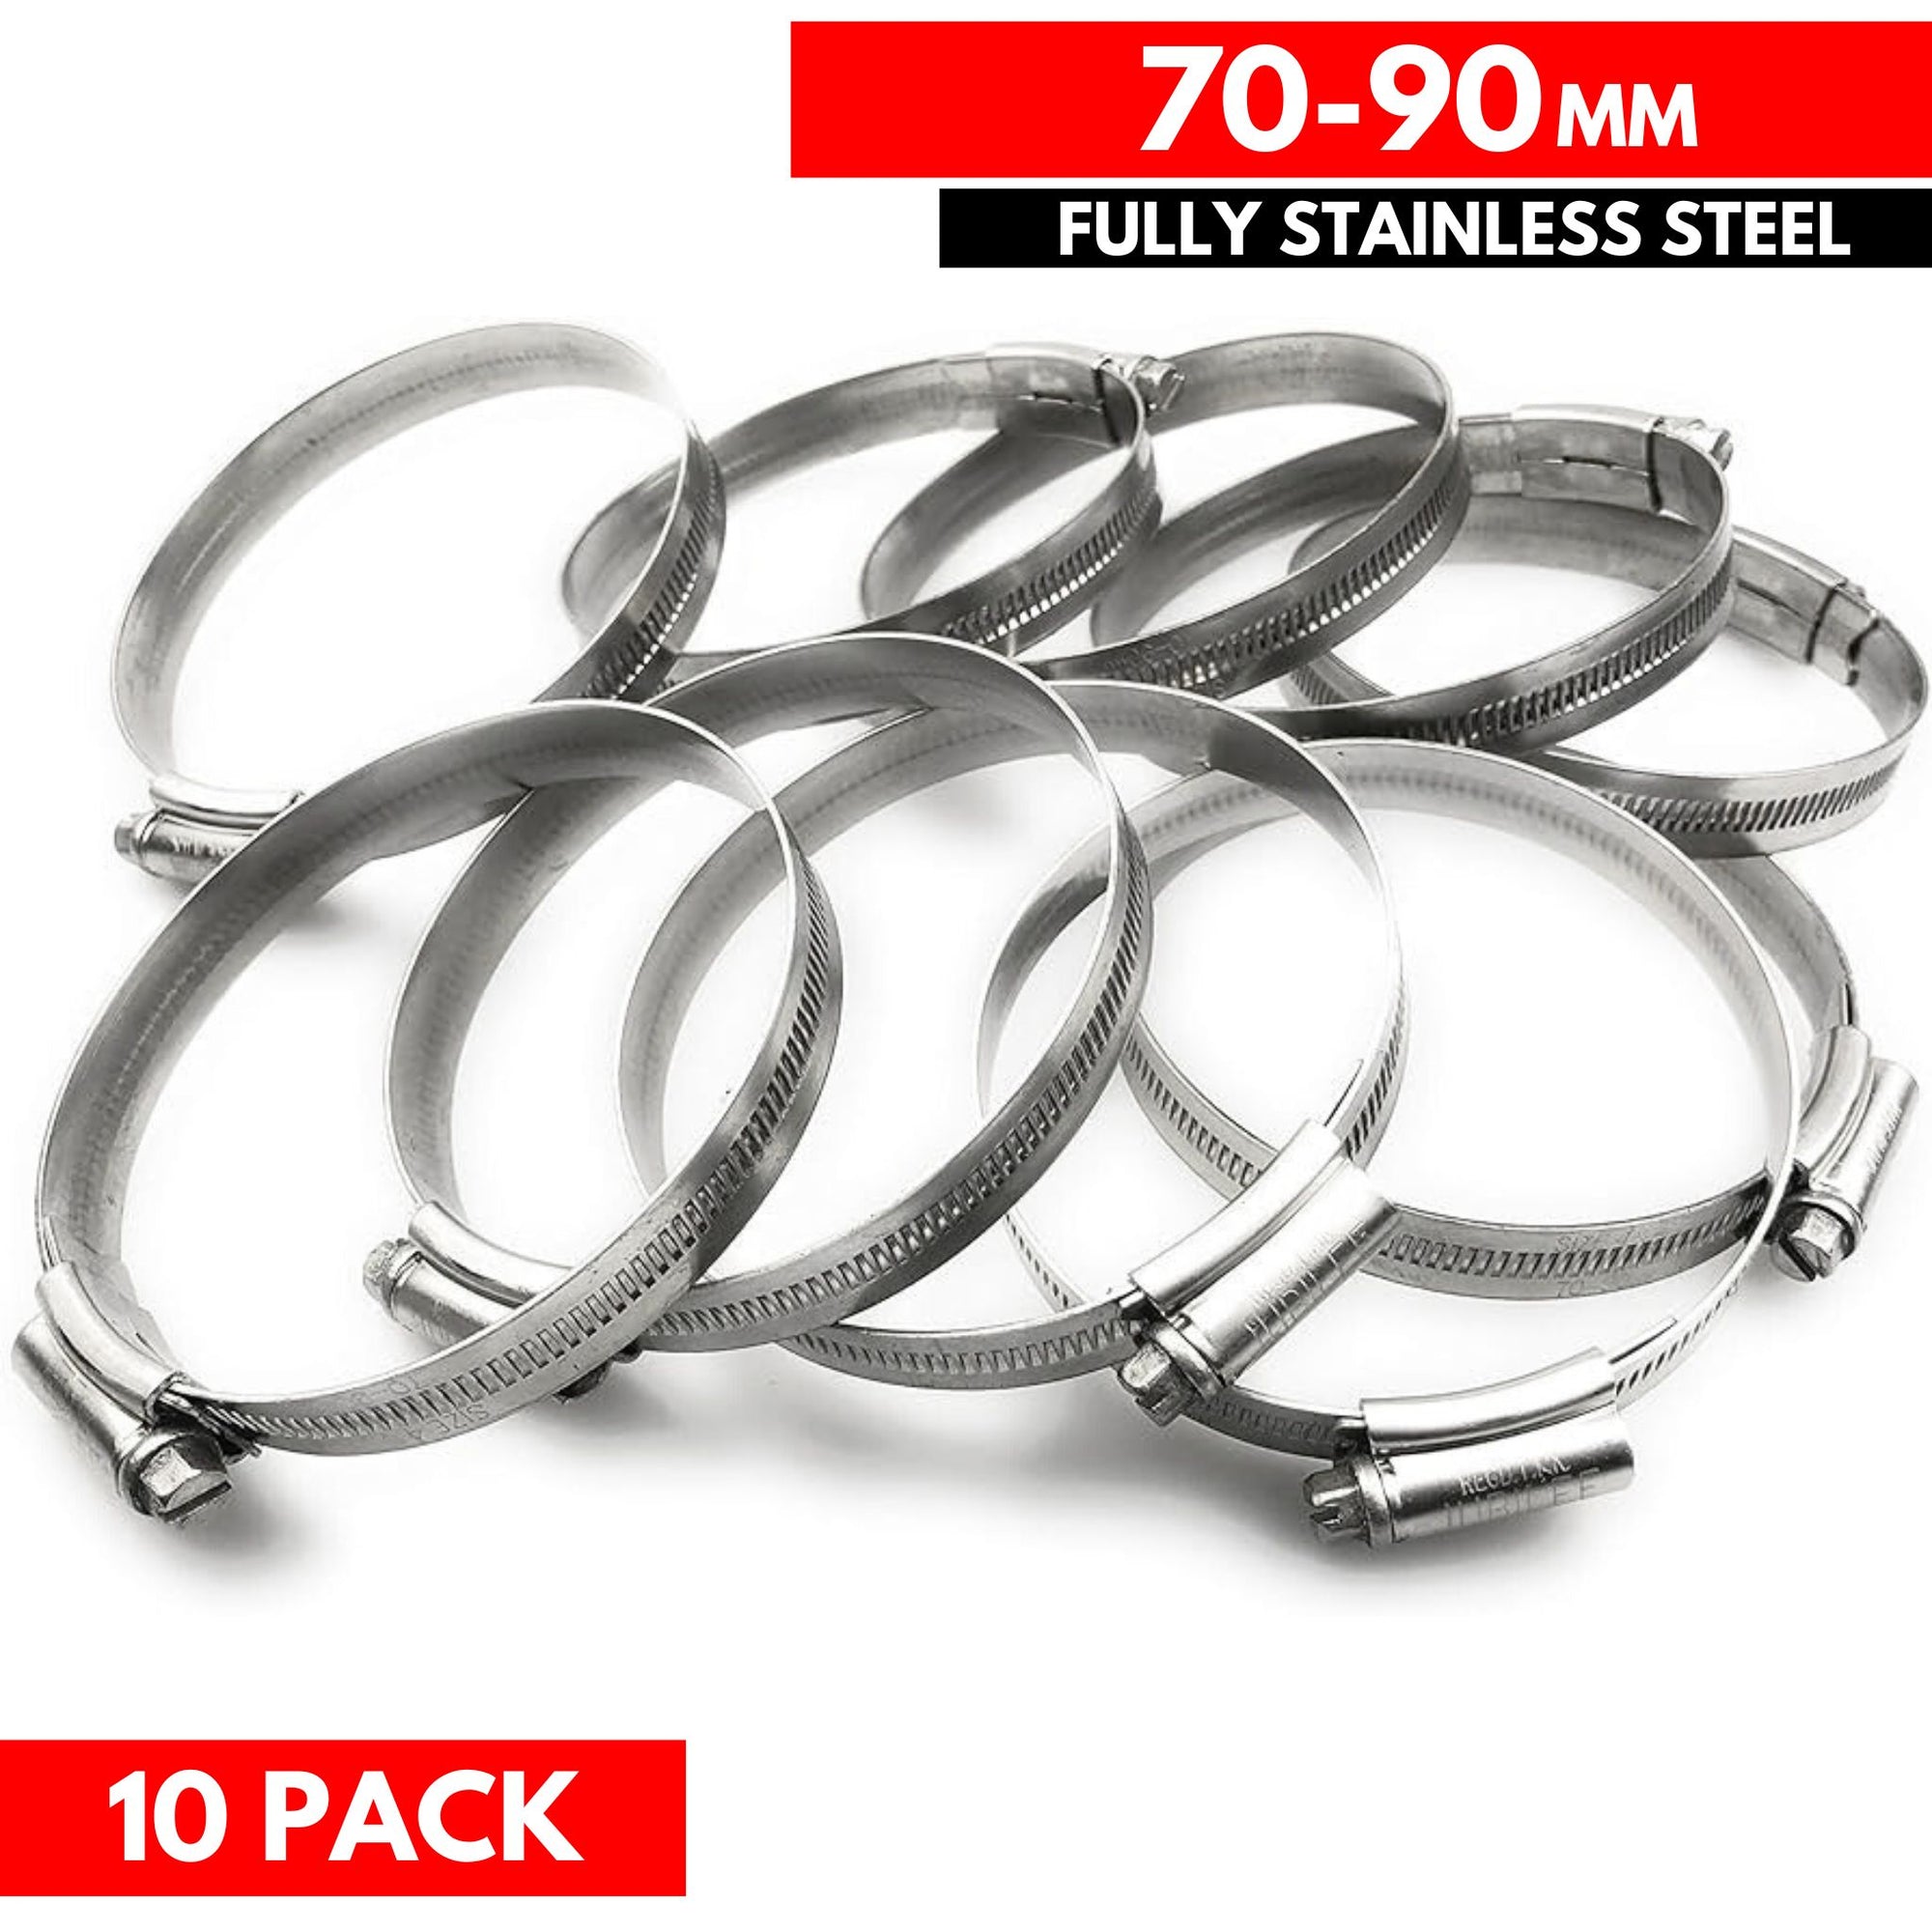 70-90mm - German Type 304 Hose Clamp - Fully Stainless Steel (10 Pieces) - South East Clearance Centre